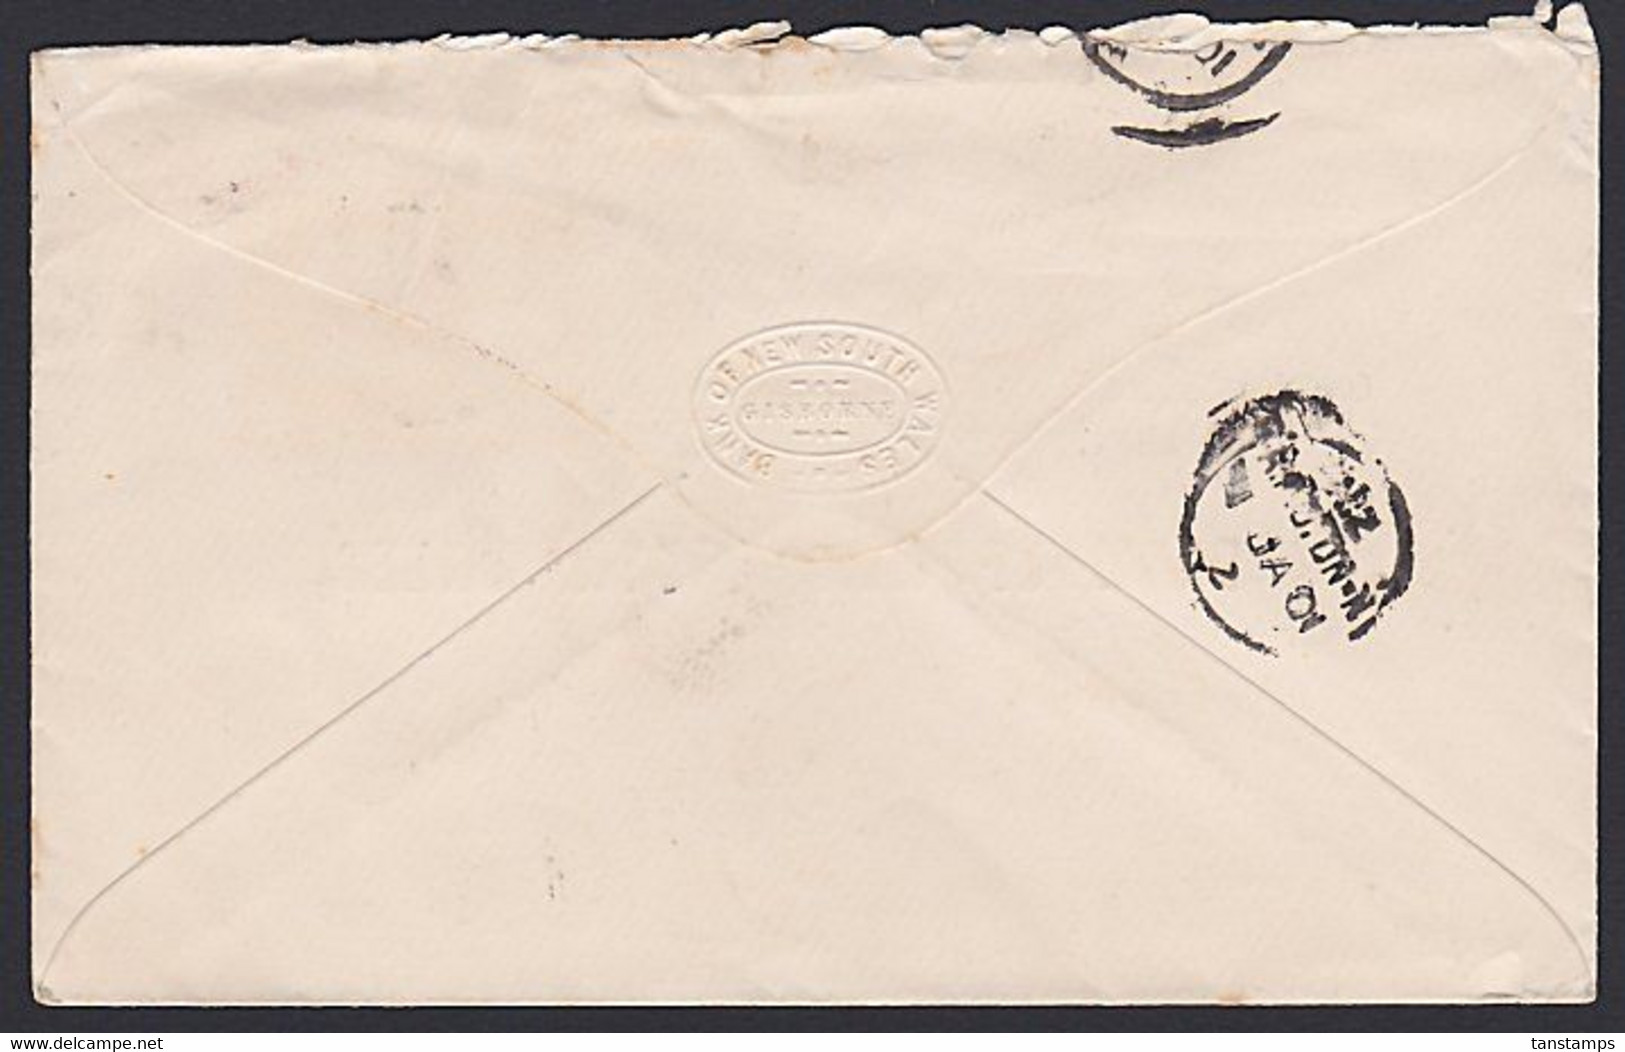 NEW ZEALAND 1900 2d PEMBROKE PAIR LOCAL PRINT RPO DN-N COMMERCIAL BANK COVER - Lettres & Documents